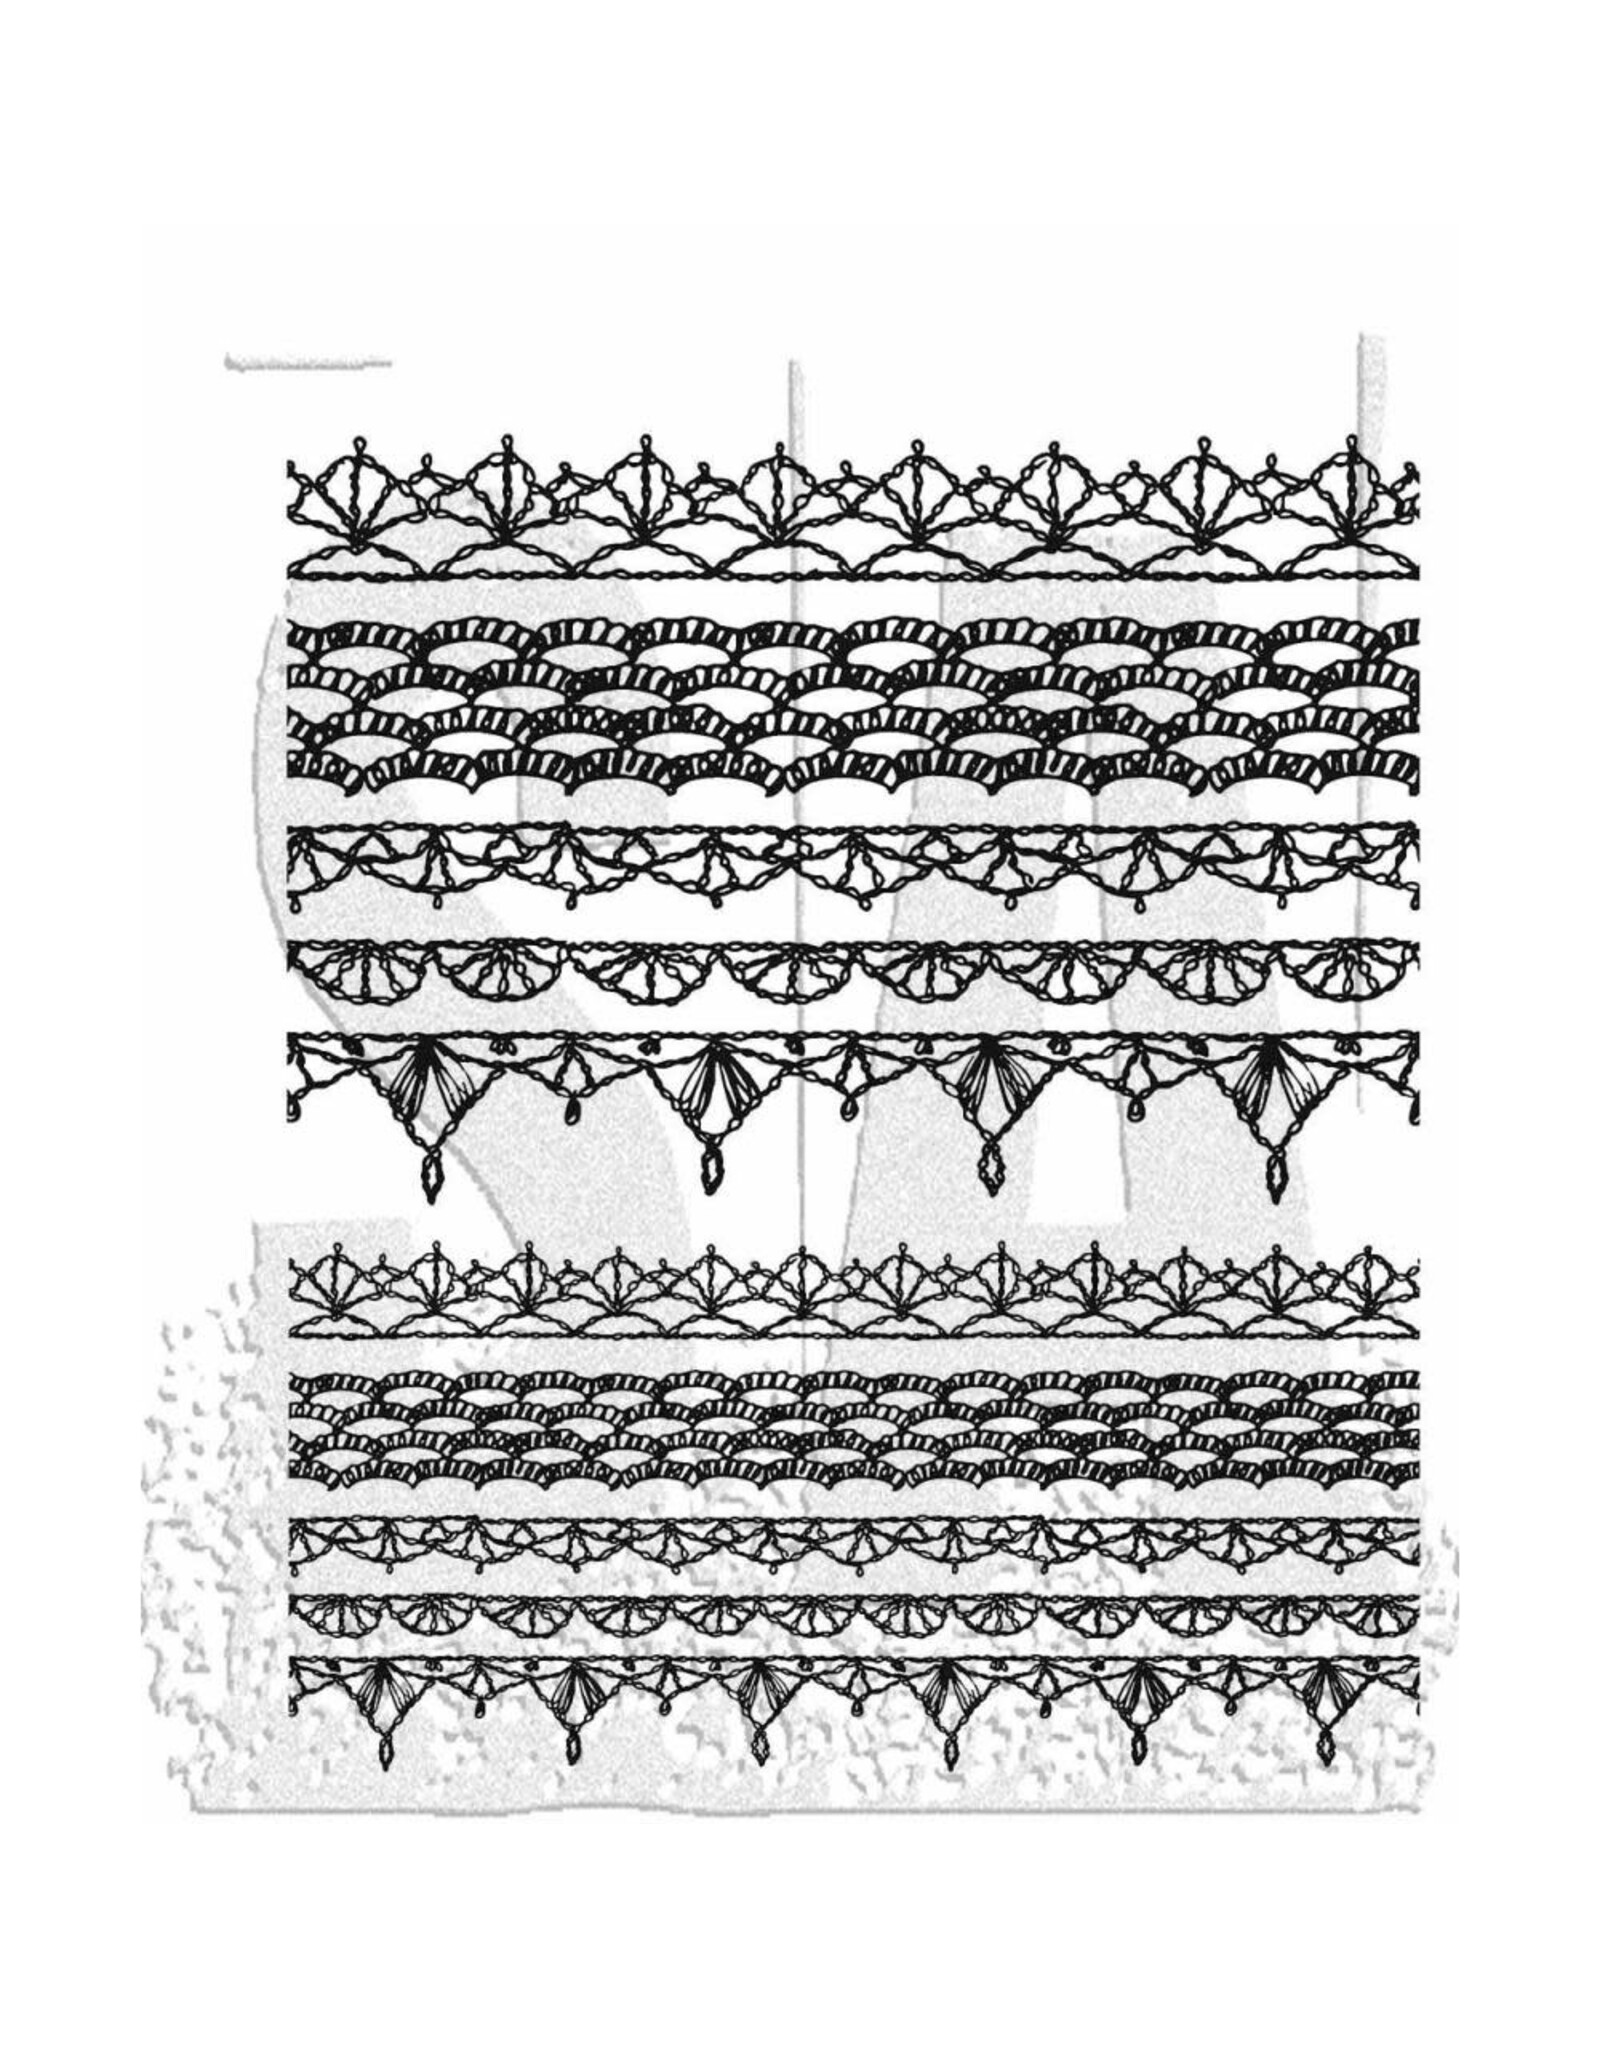 Tim Holtz - Stampers Anonymous Tim Holtz Cling Stamp - Crochet Trim